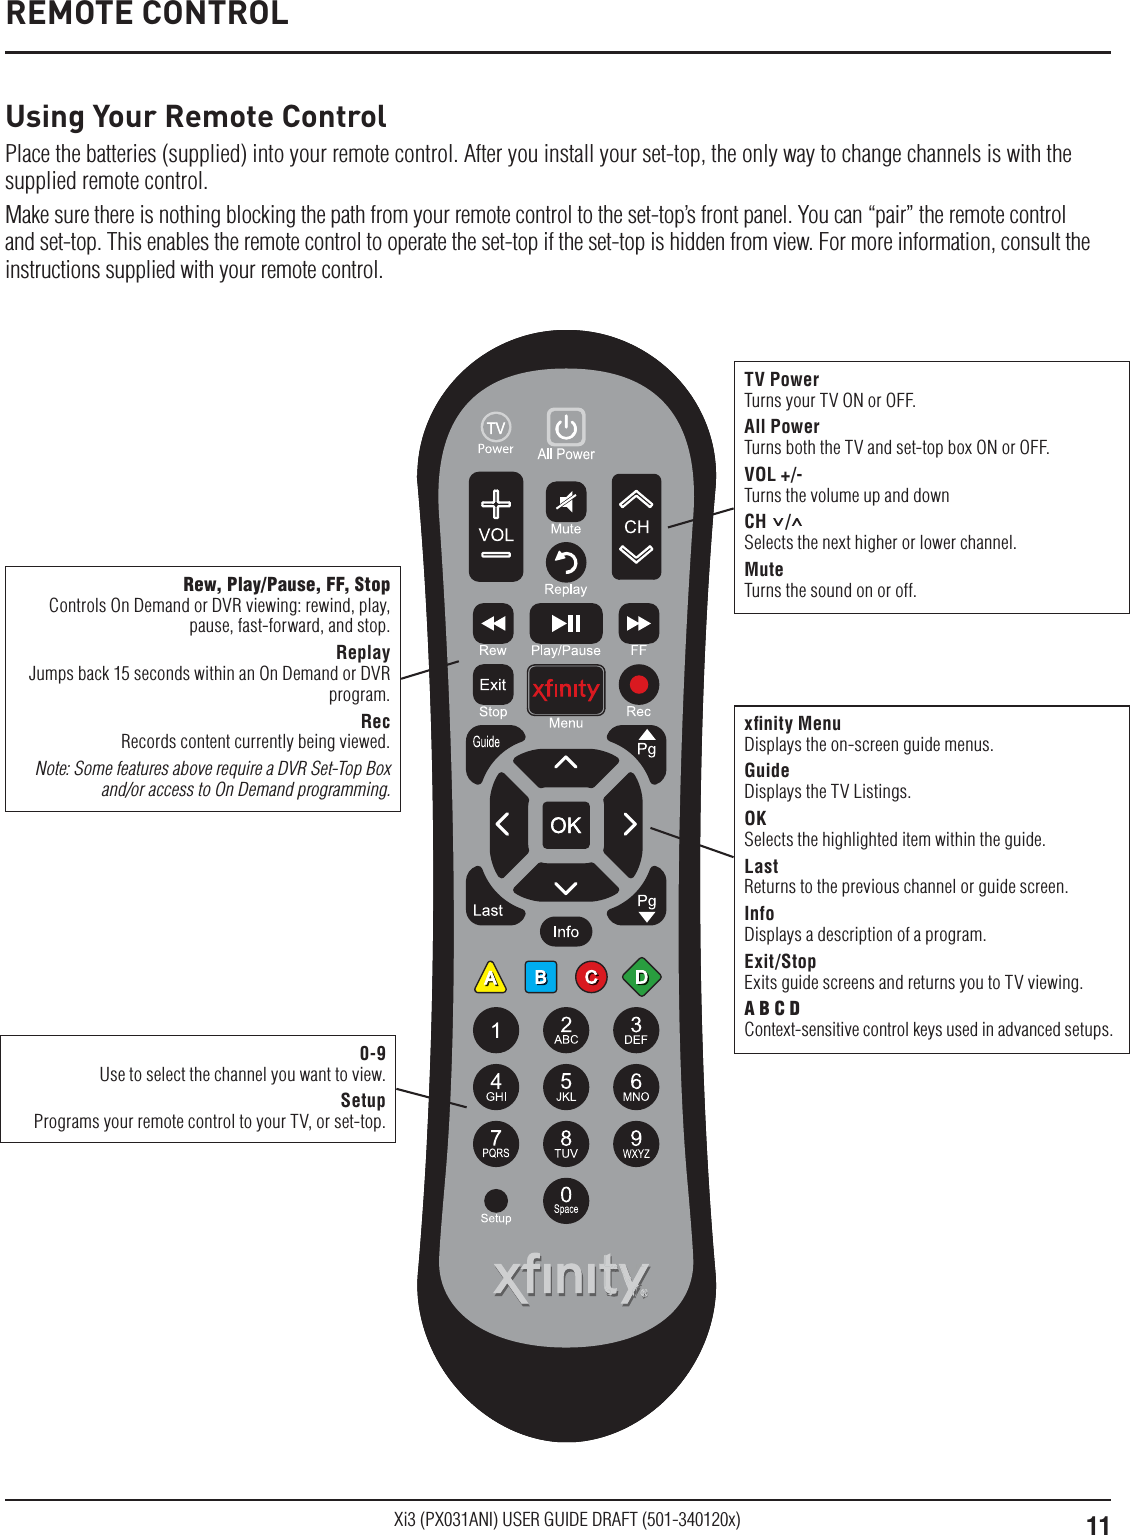 11Xi3 (PX031ANI) USER GUIDE DRAFT (501-340120x)Rew, Play/Pause, FF, StopControls On Demand or DVR viewing: rewind, play, pause, fast-forward, and stop.ReplayJumps back 15 seconds within an On Demand or DVR program.RecRecords content currently being viewed.Note: Some features above require a DVR Set-Top Box and/or access to On Demand programming.xﬁnity MenuDisplays the on-screen guide menus.GuideDisplays the TV Listings.OKSelects the highlighted item within the guide.LastReturns to the previous channel or guide screen.InfoDisplays a description of a program.Exit/StopExits guide screens and returns you to TV viewing.A B C DContext-sensitive control keys used in advanced setups.0-9Use to select the channel you want to view.SetupPrograms your remote control to your TV, or set-top.REMOTE CONTROLUsing Your Remote ControlPlace the batteries (supplied) into your remote control. After you install your set-top, the only way to change channels is with the supplied remote control.Make sure there is nothing blocking the path from your remote control to the set-top’s front panel. You can “pair” the remote control and set-top. This enables the remote control to operate the set-top if the set-top is hidden from view. For more information, consult the instructions supplied with your remote control.TV PowerTurns your TV ON or OFF.All PowerTurns both the TV and set-top box ON or OFF.VOL +/-Turns the volume up and downCH    / Selects the next higher or lower channel.MuteTurns the sound on or off. 